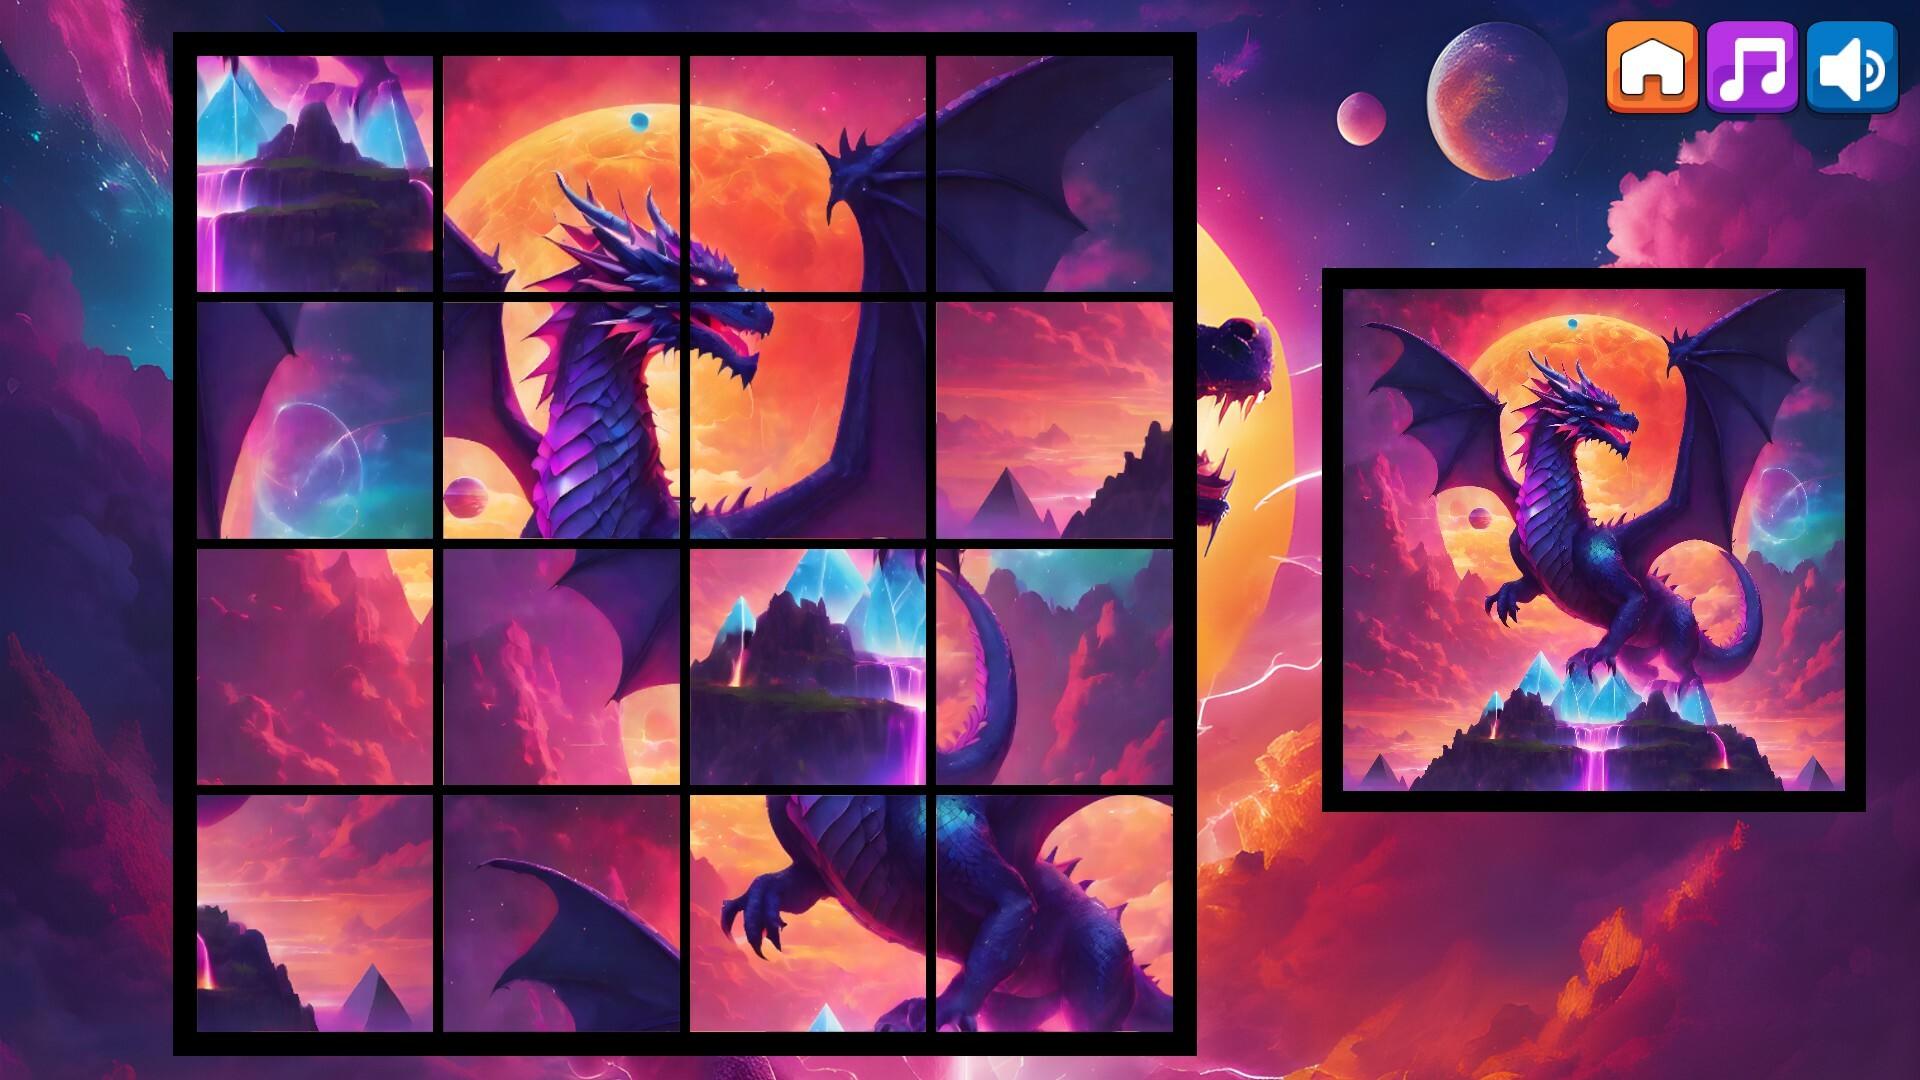 OG Puzzlers: Synthwave Dragons 게임 스크린 샷